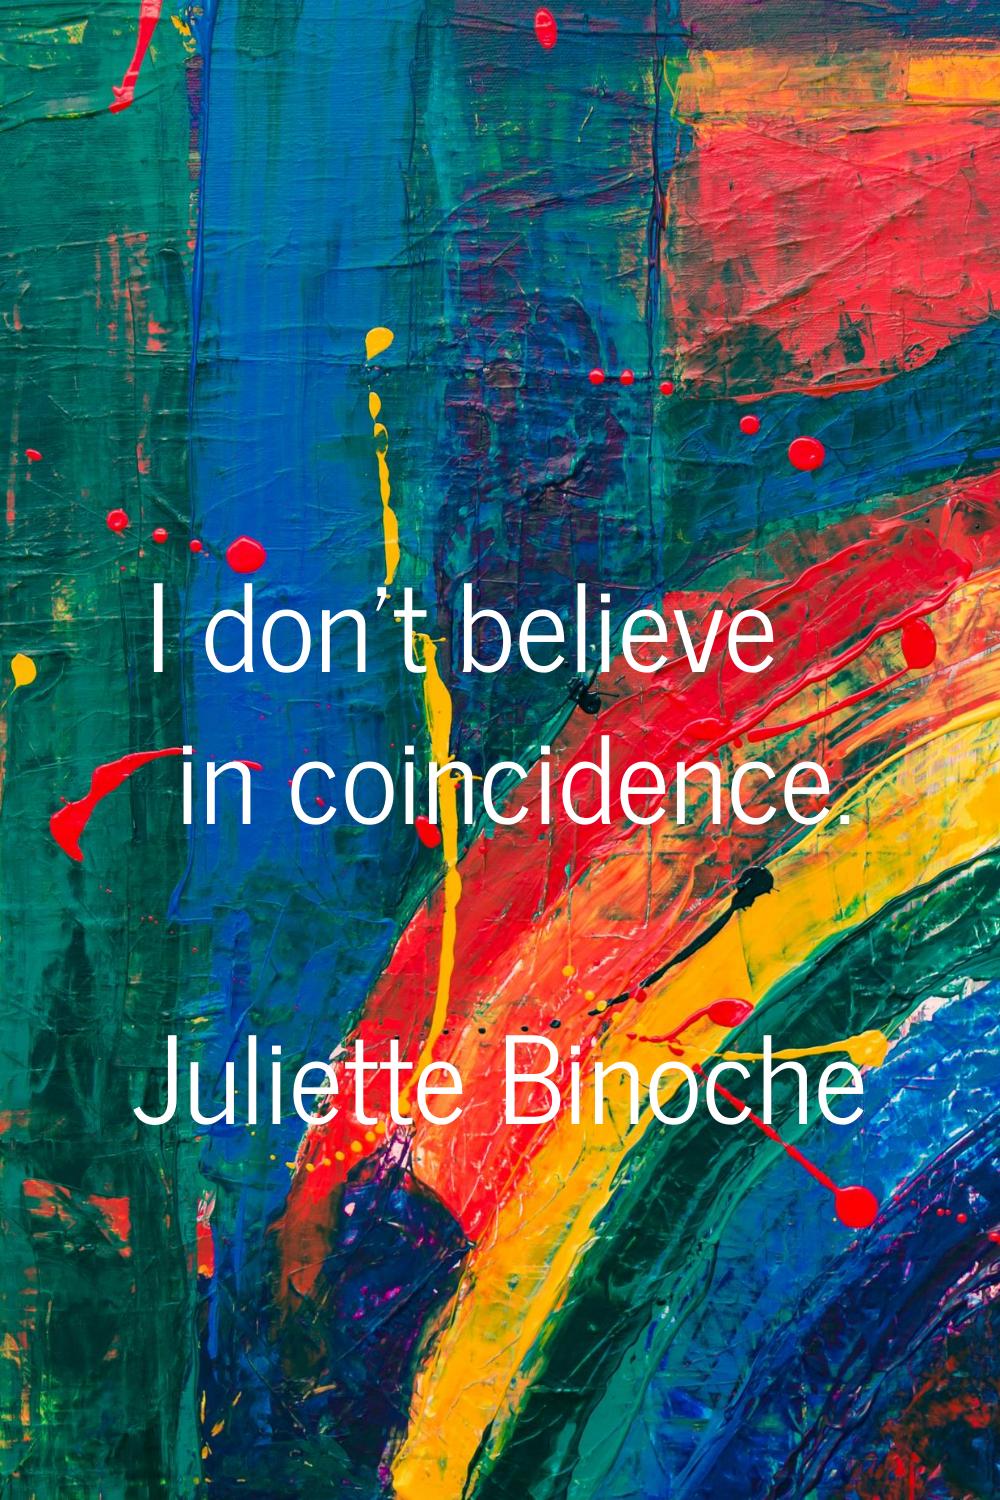 I don't believe in coincidence.